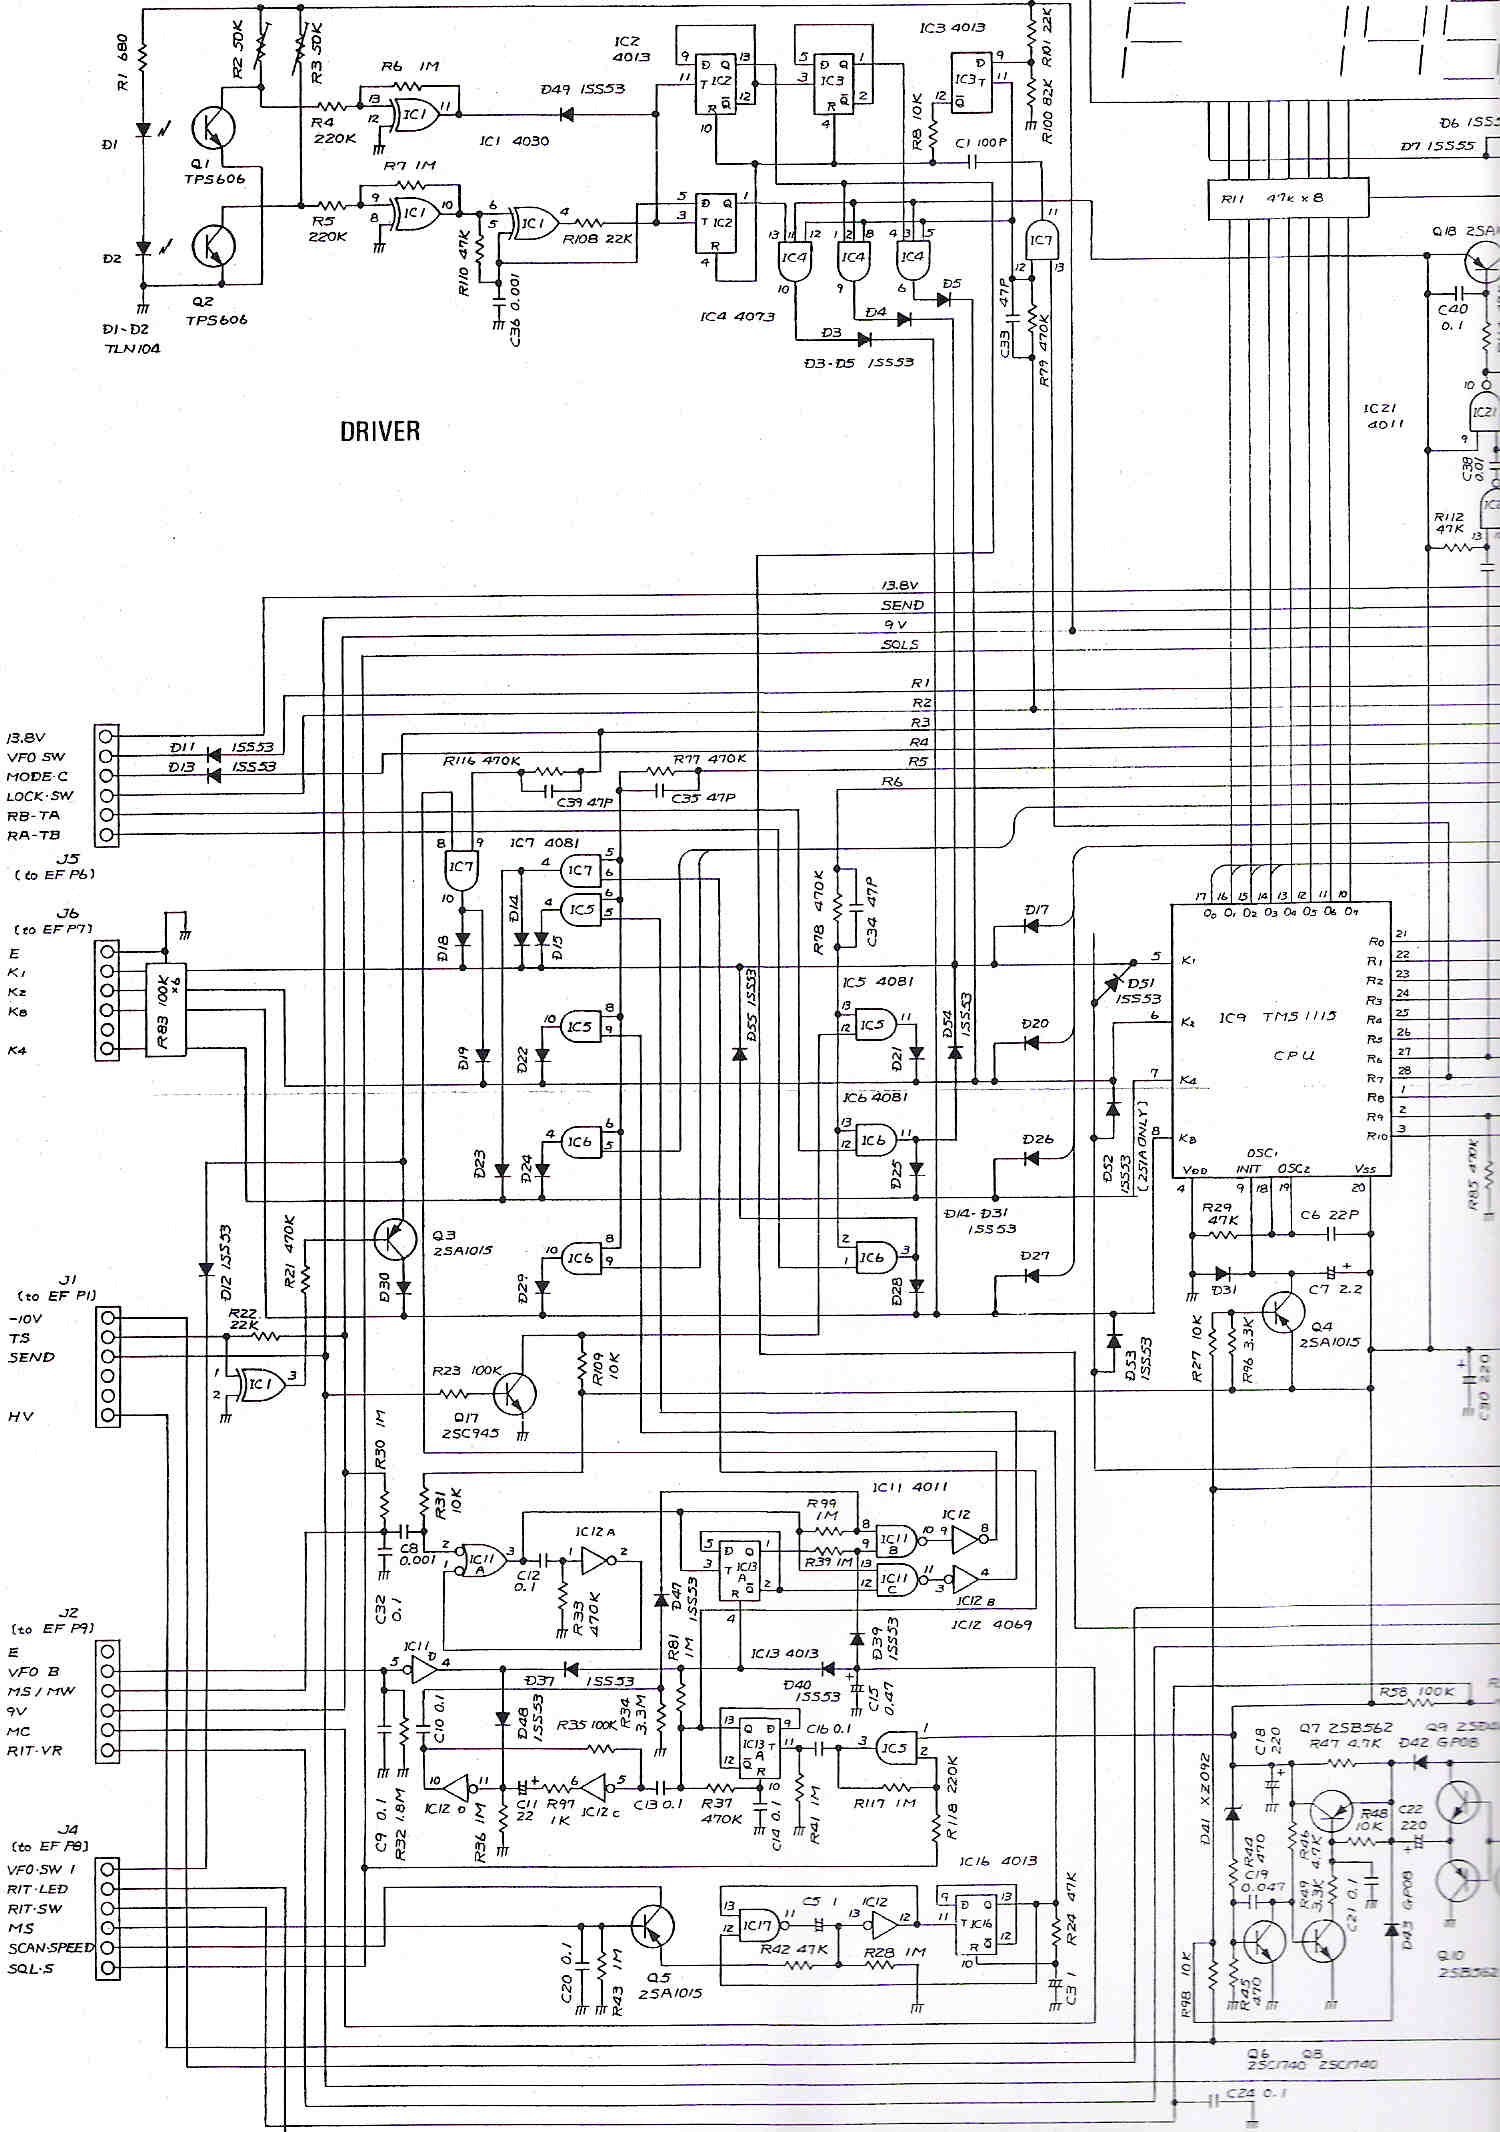 ICOM IC-251 This is the electrical diagram, scan one.